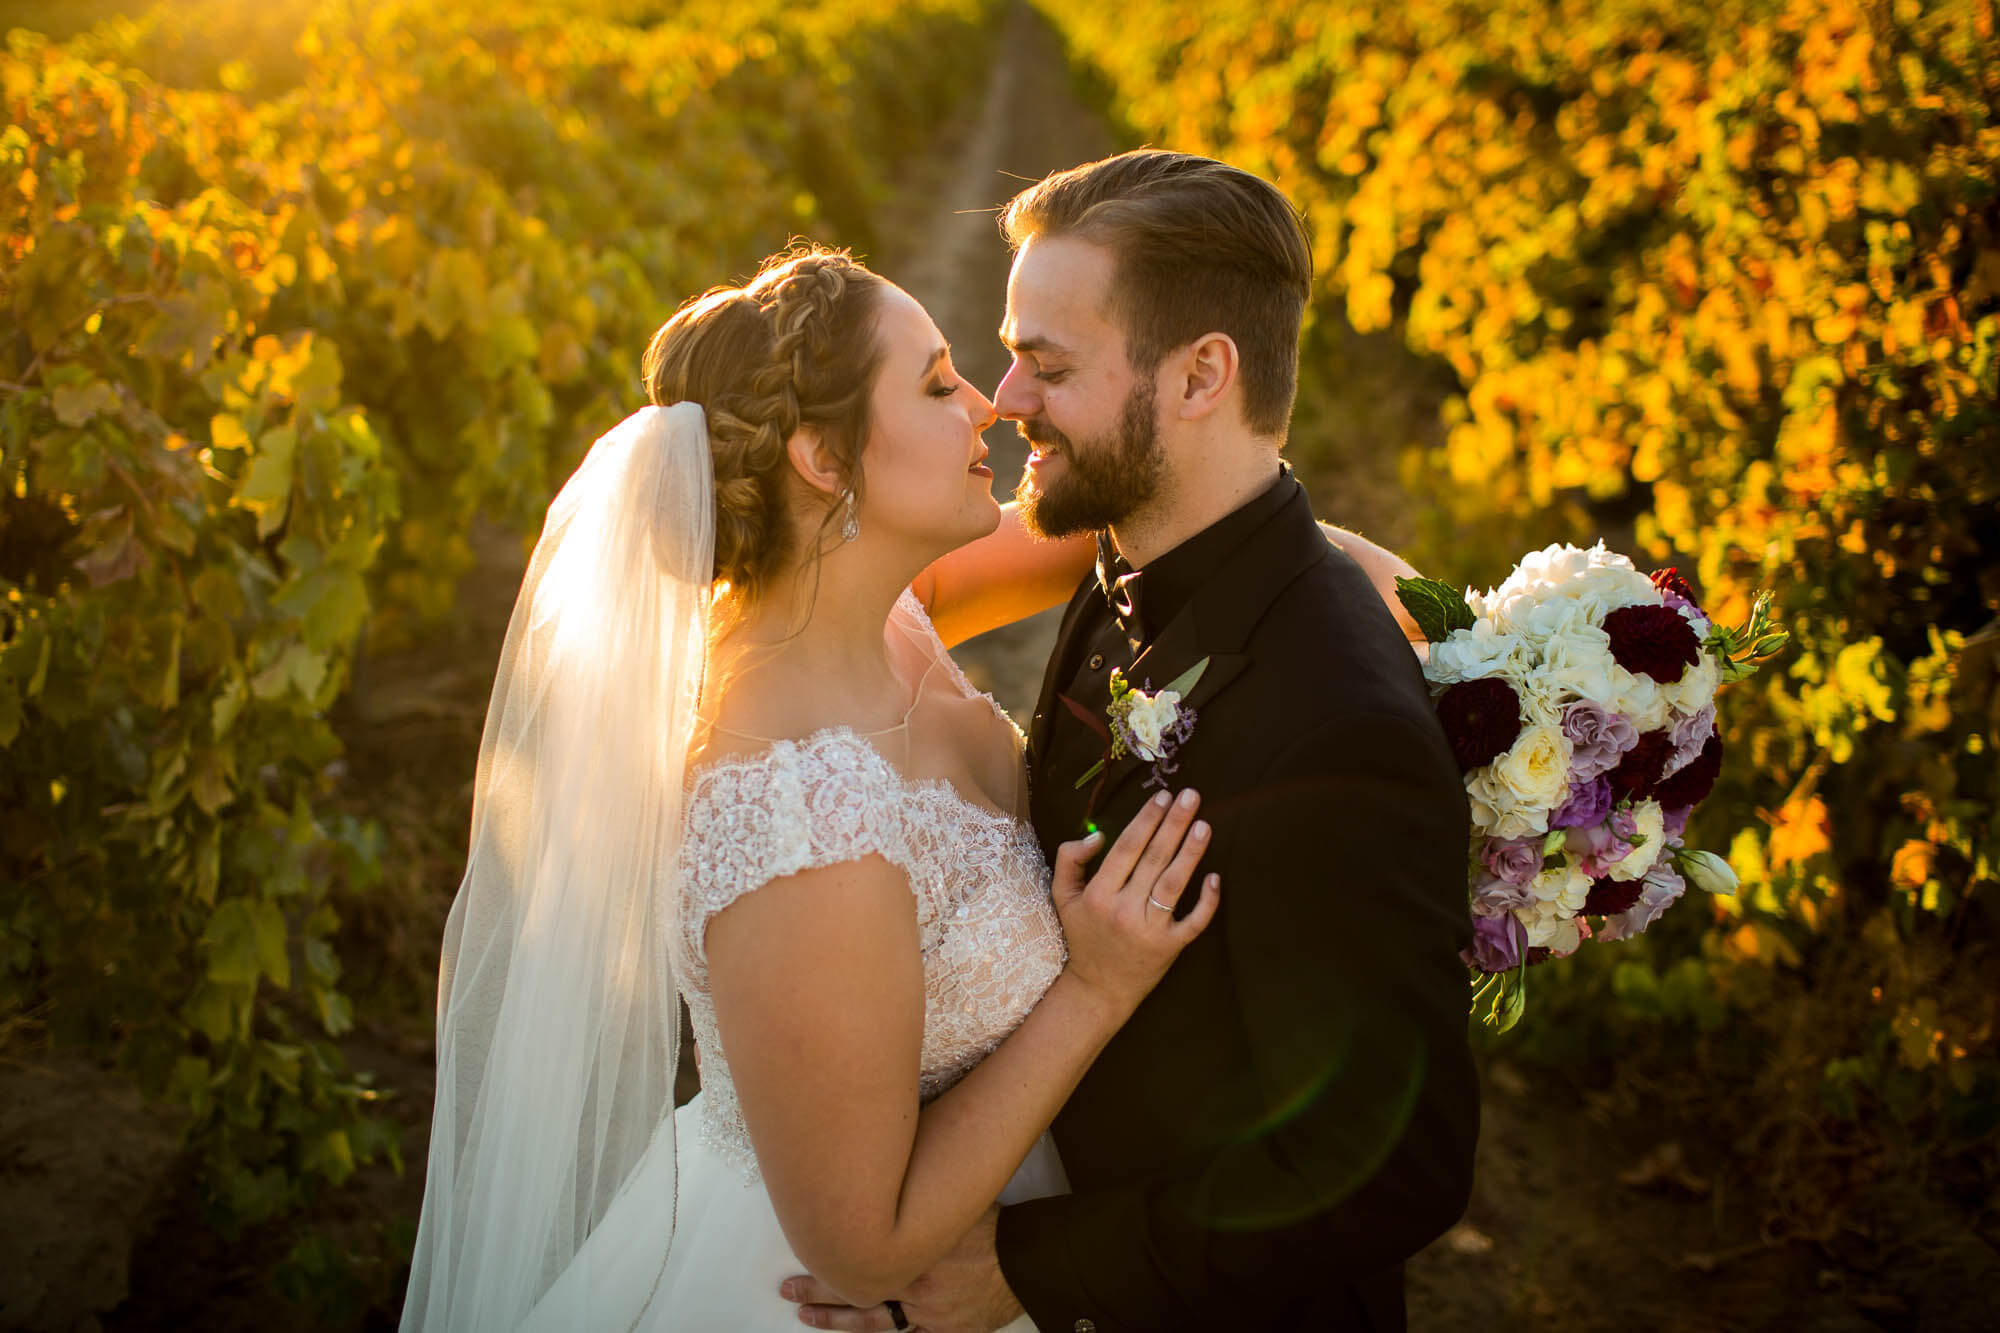 Portrait of the bride and groom in a vineyard at sunset